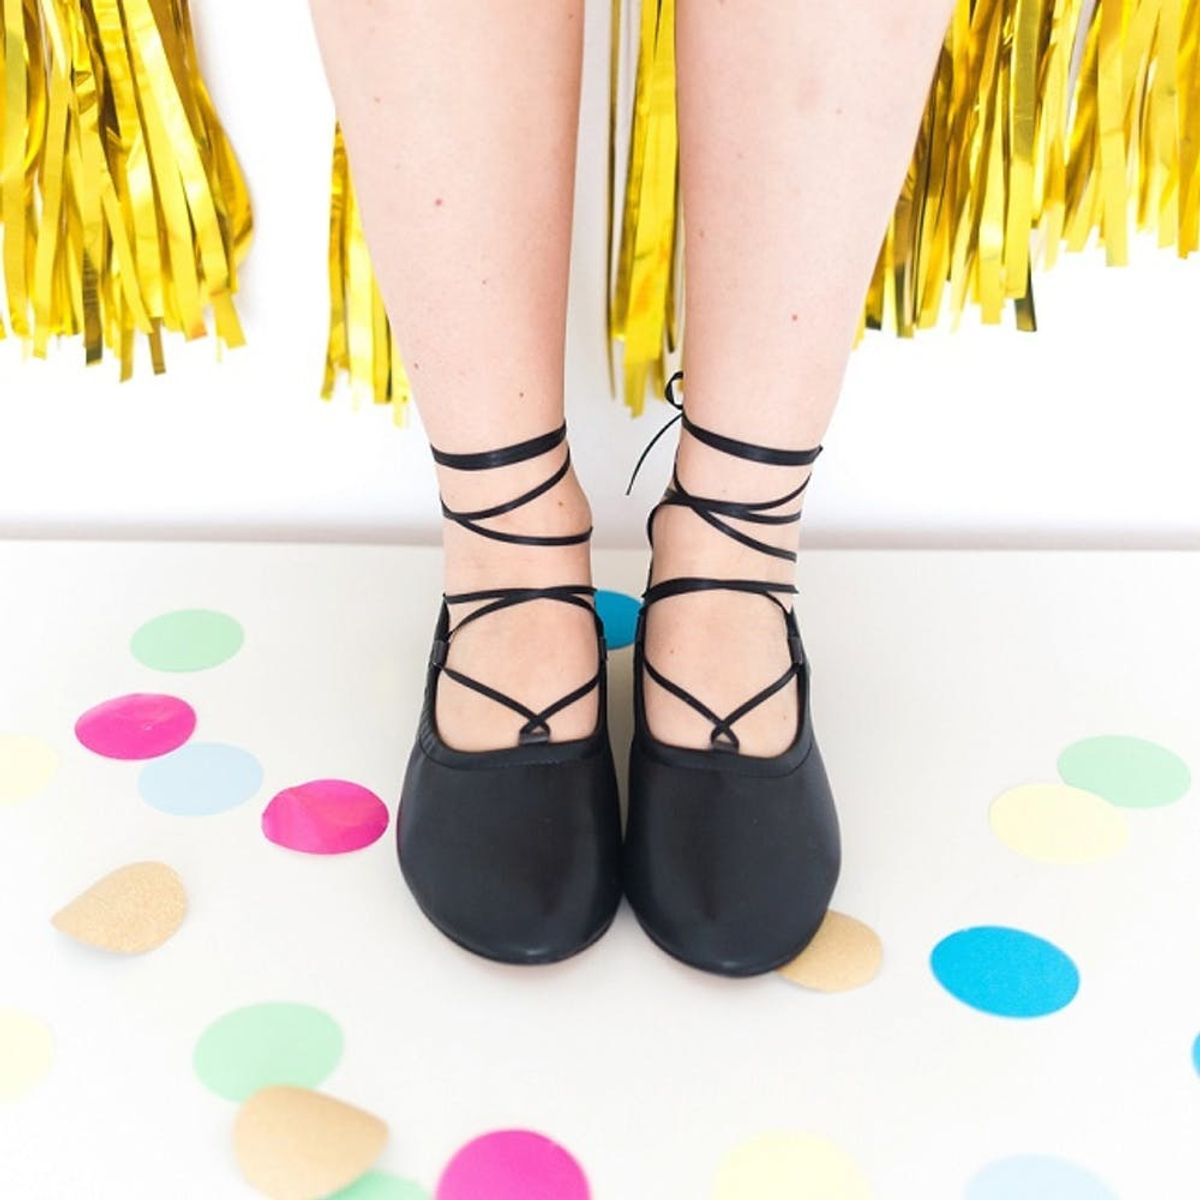 Update Your Summer Shoes for Fall With This Ballet Flats Hack